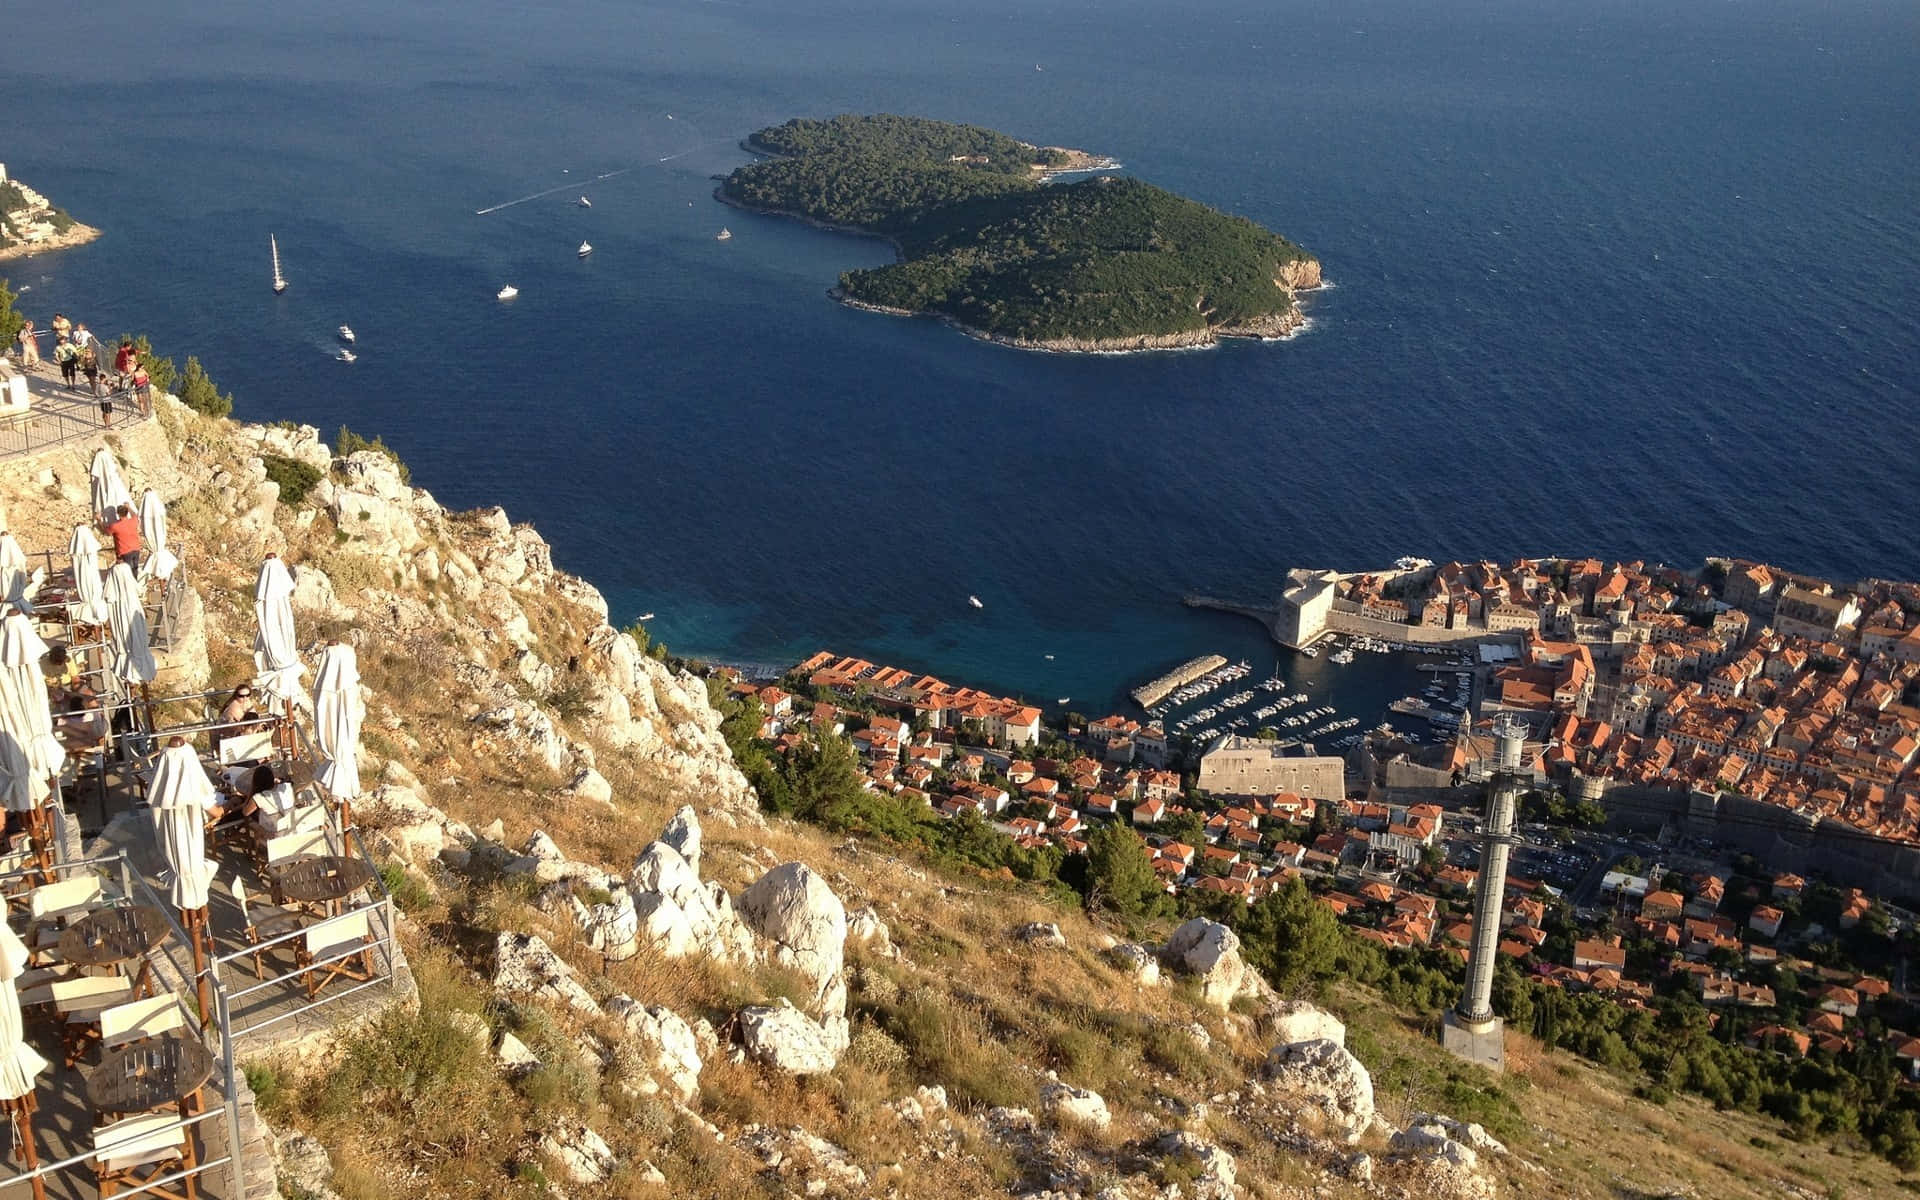 Splendid view of the historic city of Dubrovnik perched on a steep mountainside Wallpaper